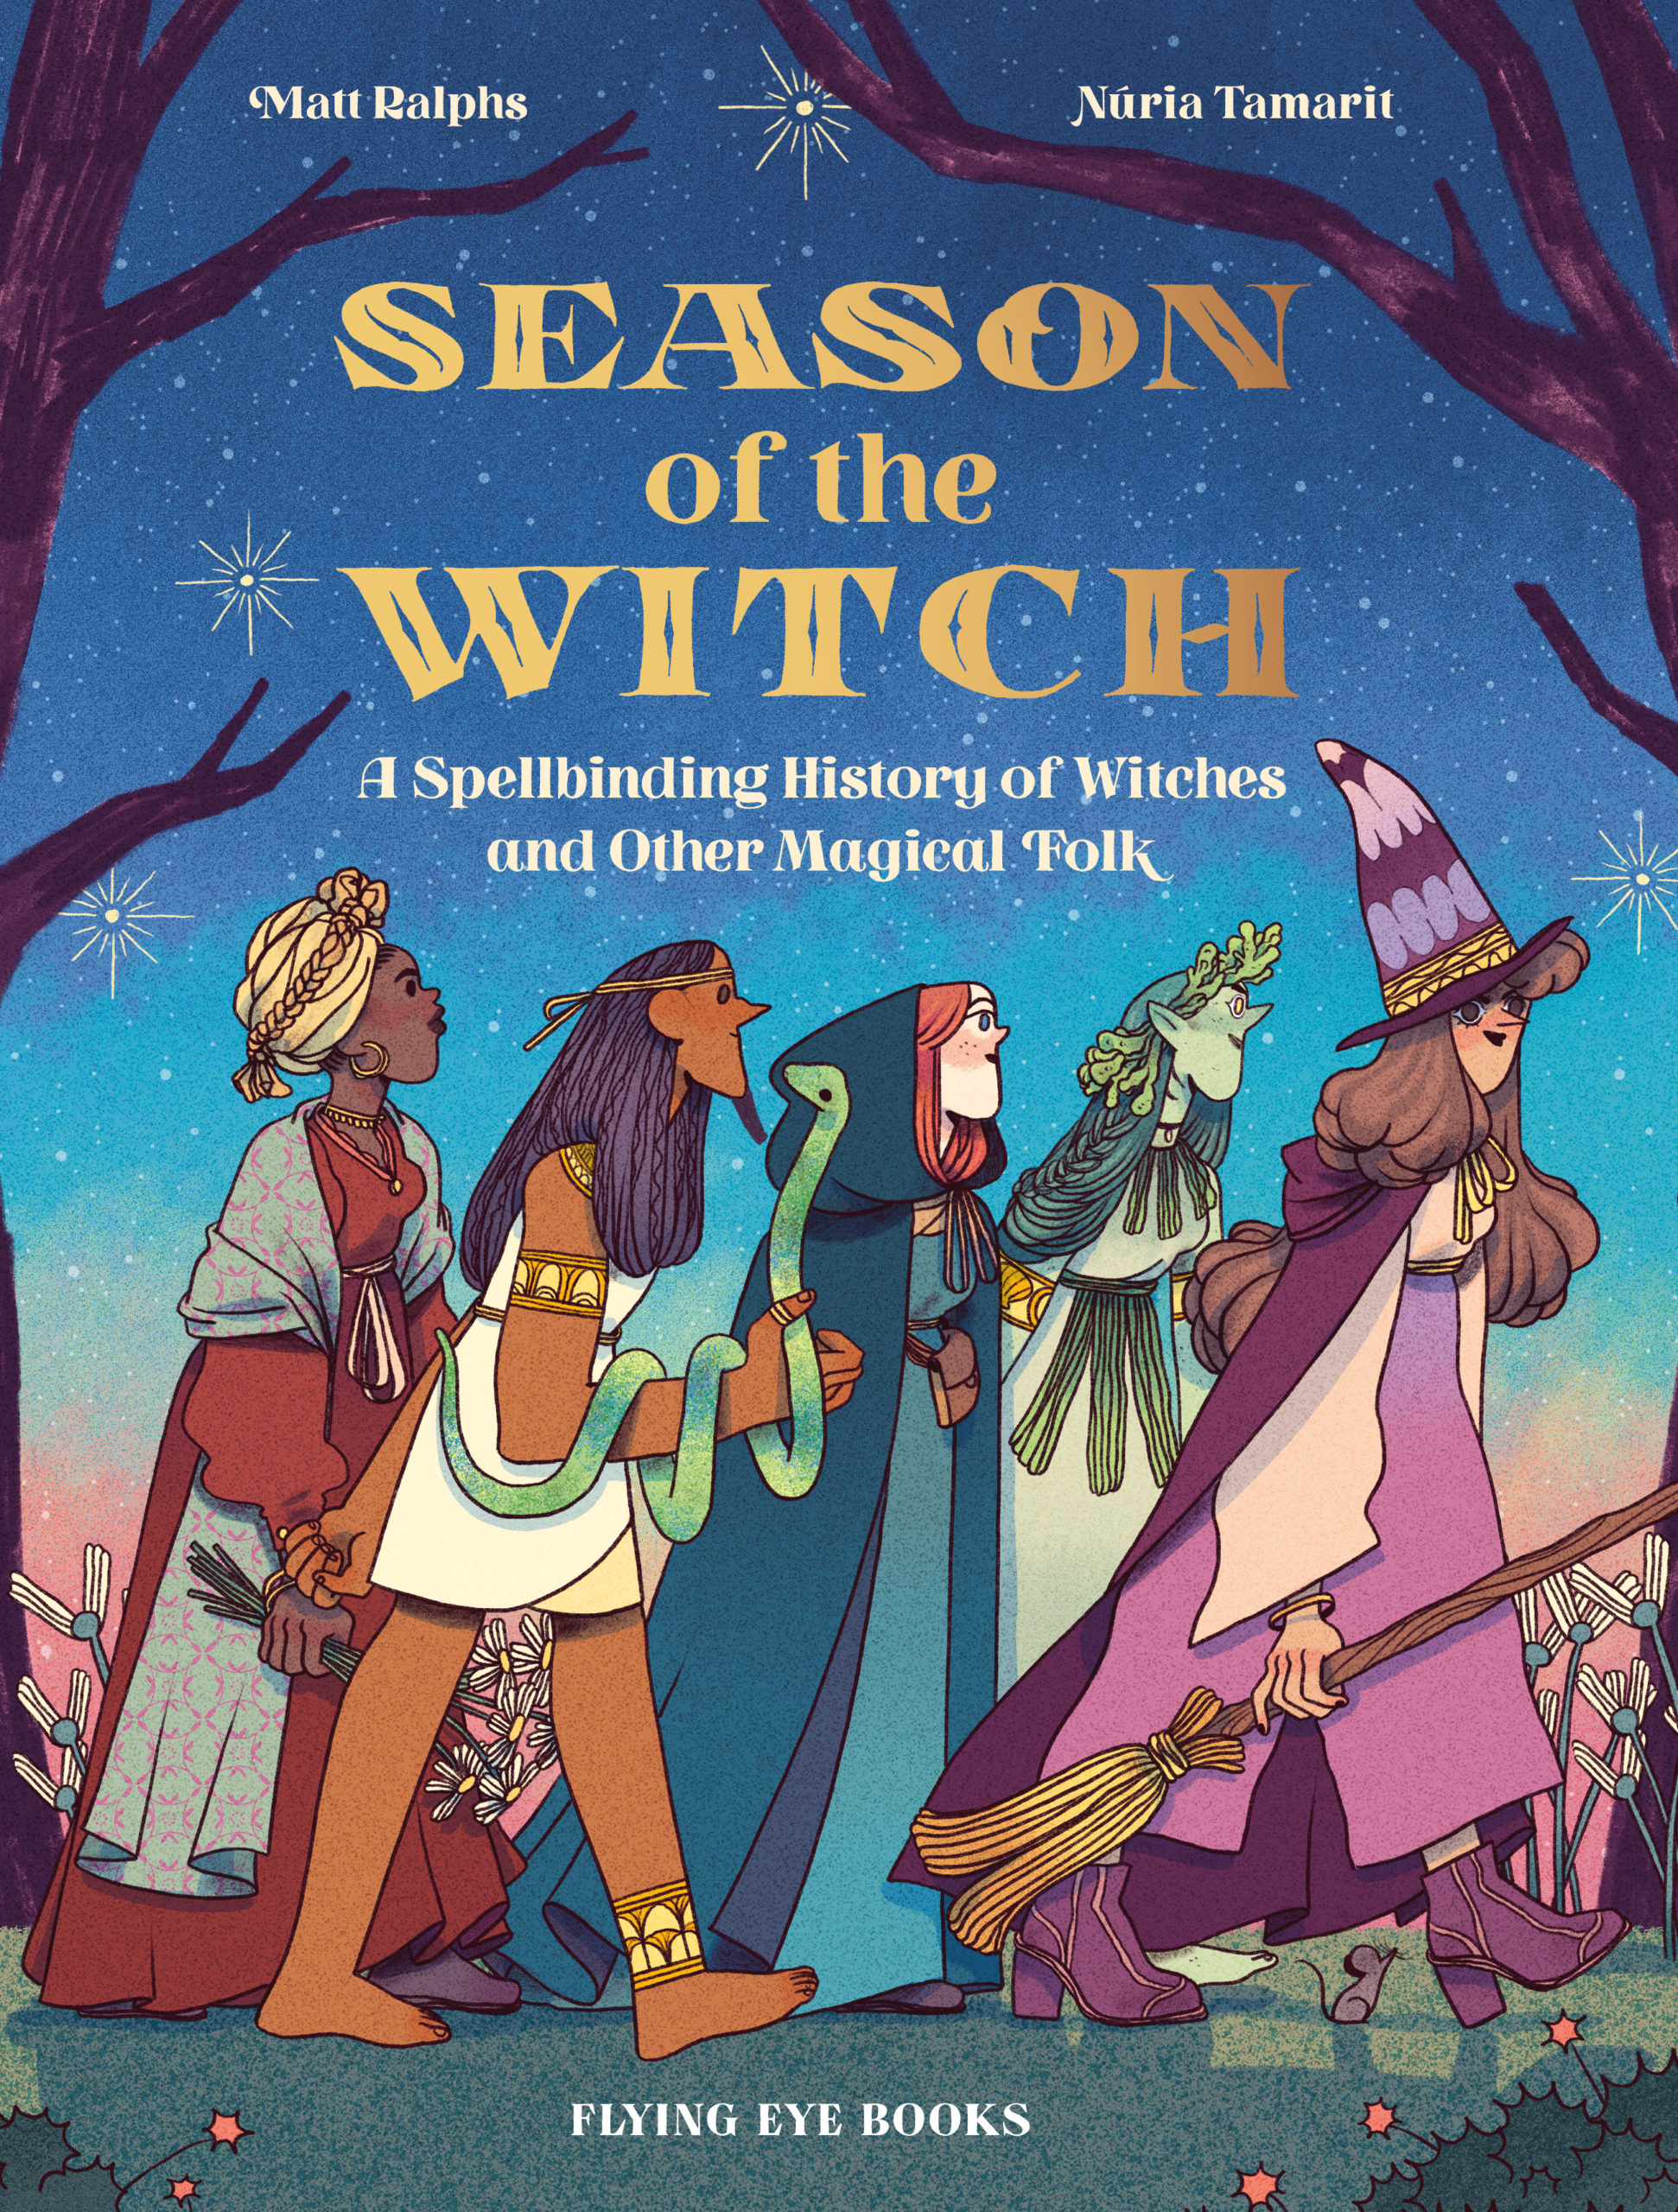 Witch the The Witch: